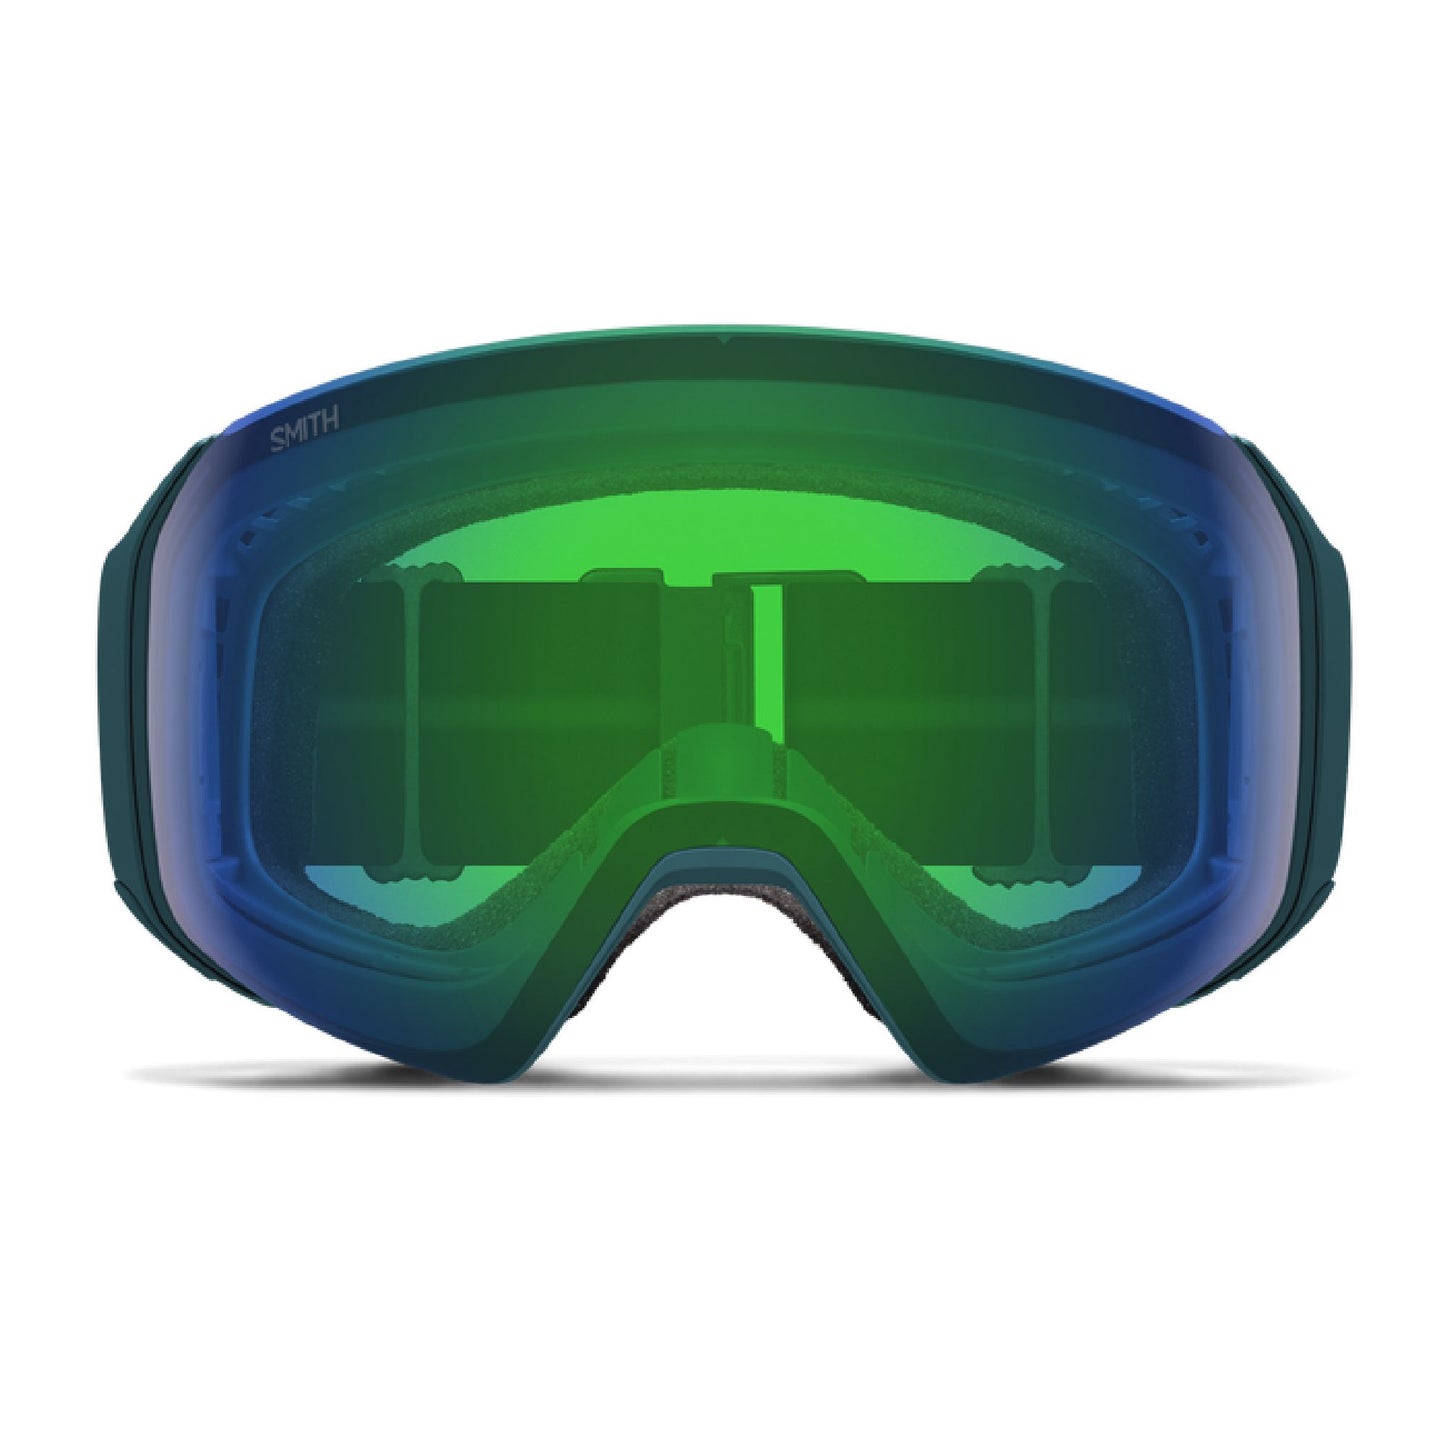 Smith 4D MAG S Low Bridge Fit Snow Goggle Pacific Flow / ChromaPop Everyday Green Mirror Snow Goggles